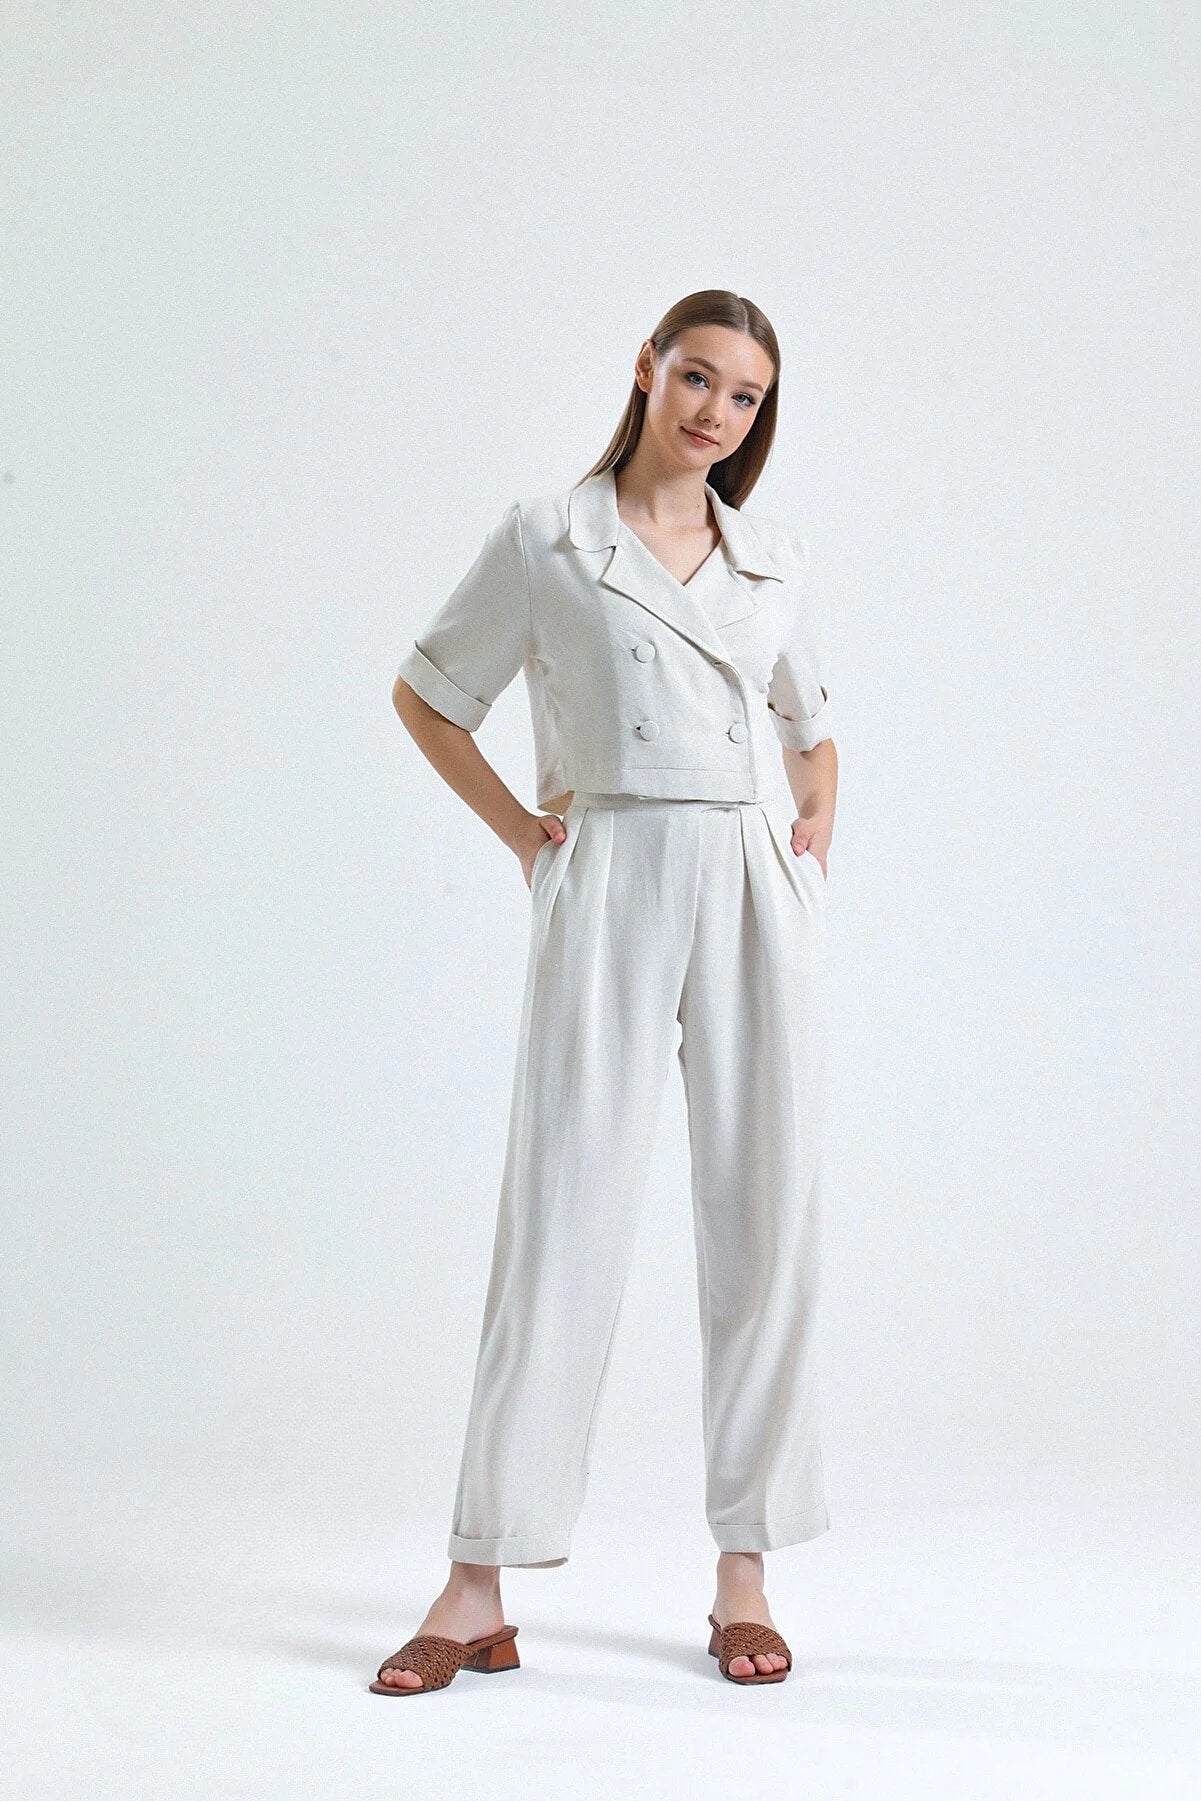 High Waist Plicated Detail Pants With Side Pockets and Belt Holes Trouser  Pants 19A0054